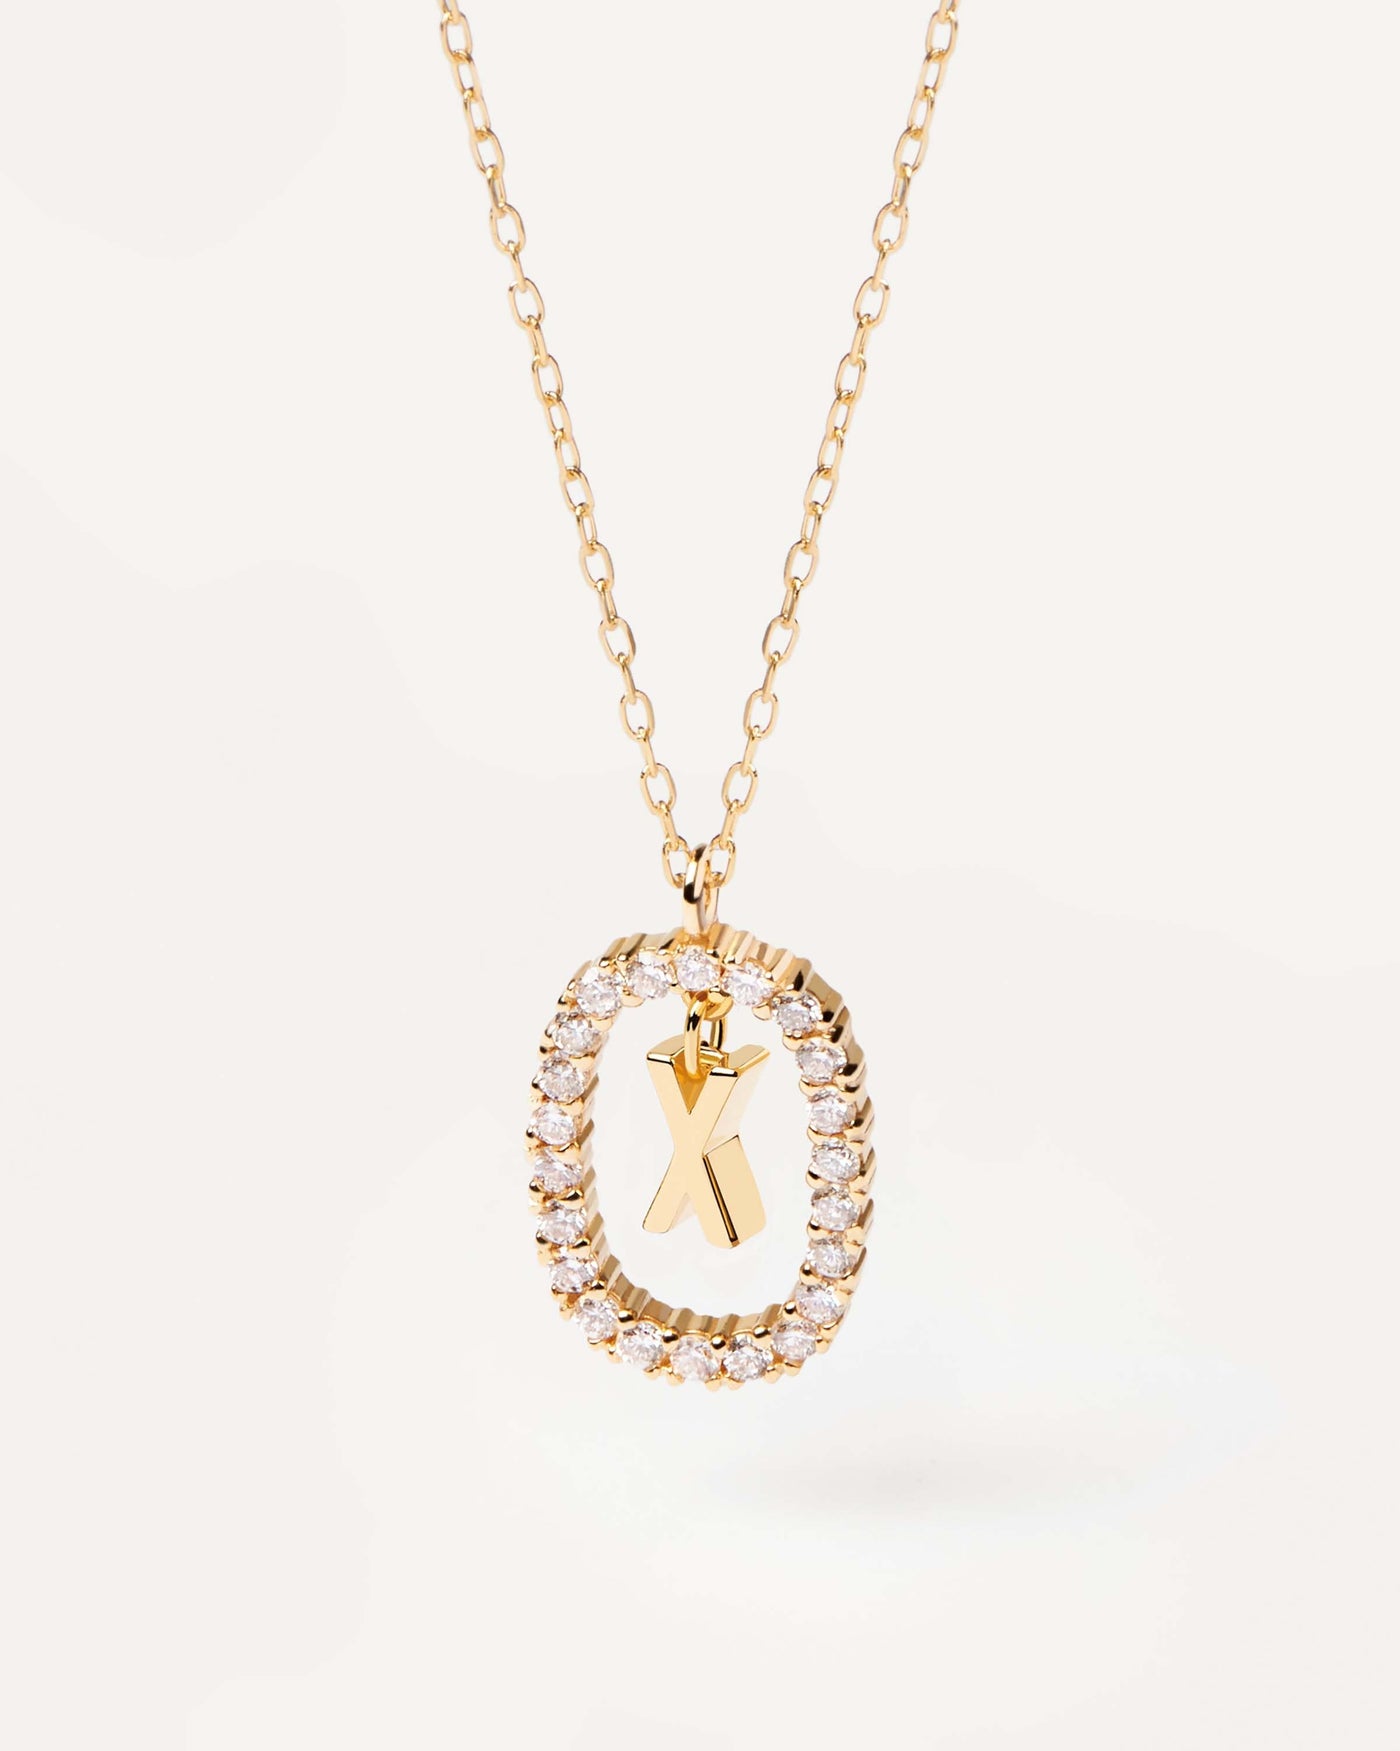 2023 Selection | Diamonds and Gold Letter X Necklace. Initial X necklace in solid yellow gold, circled by 0.33 carats lab-grown diamonds. Get the latest arrival from PDPAOLA. Place your order safely and get this Best Seller. Free Shipping.